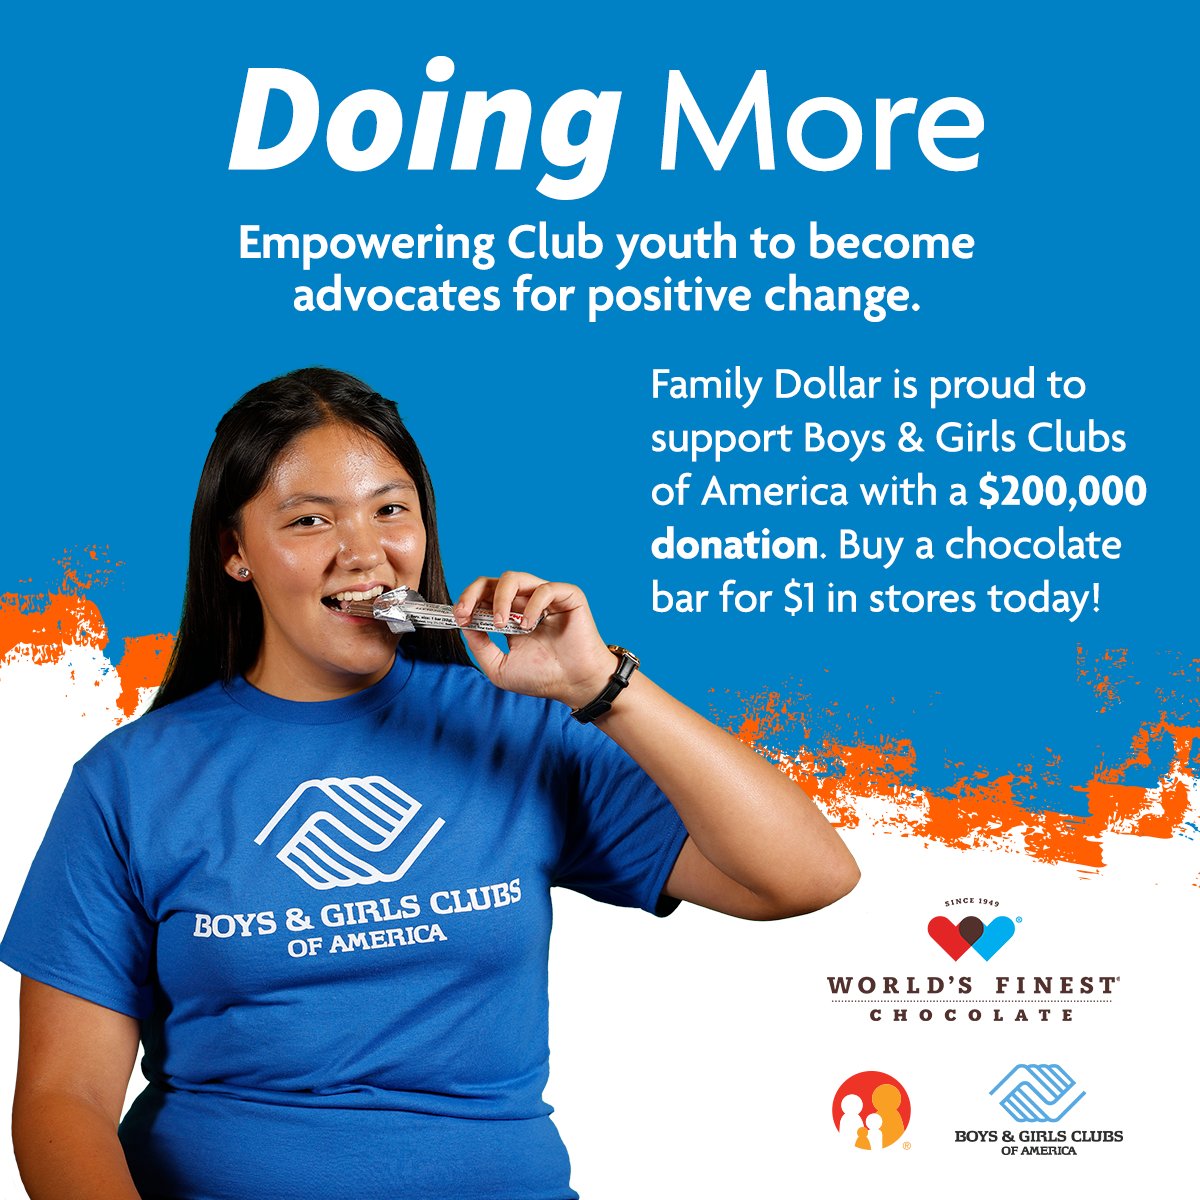 Family Dollar is proud to support Boys & Girls Clubs of America and Club (@bgca_clubs) youth in advocating for positive change in their communities. Learn more and buy a World’s Finest Chocolate® bar in stores to show your support: FD.social/7xkb50QO0l1